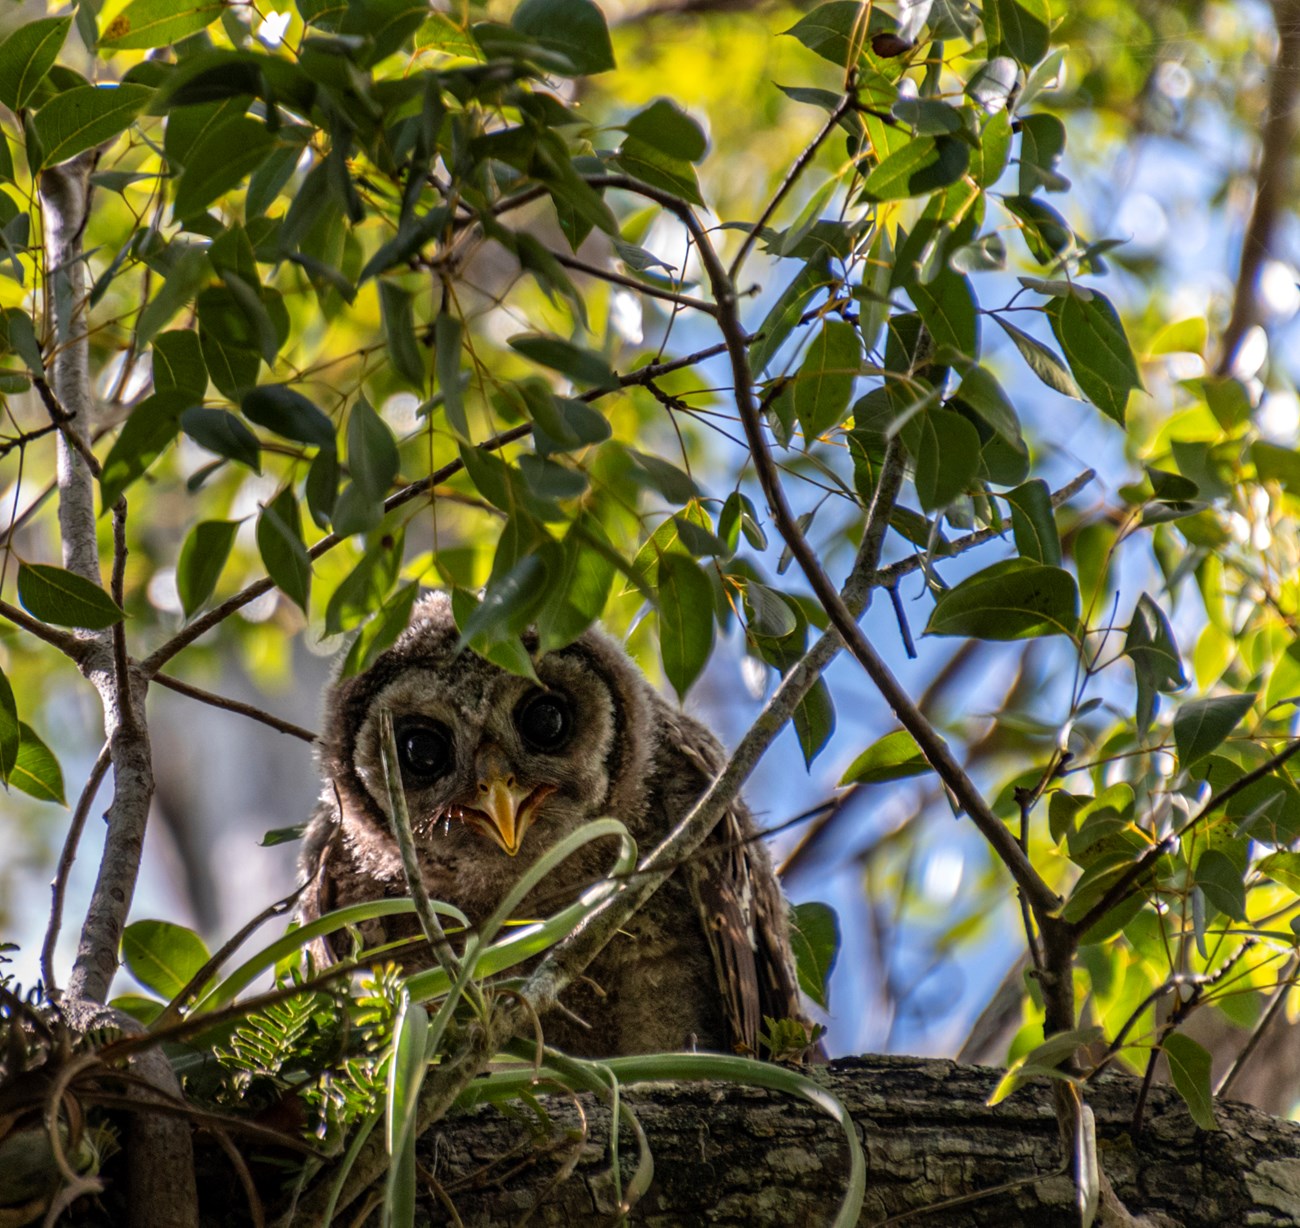 A young, brown owl peeks through some vegetation while perched up in a tree branch.